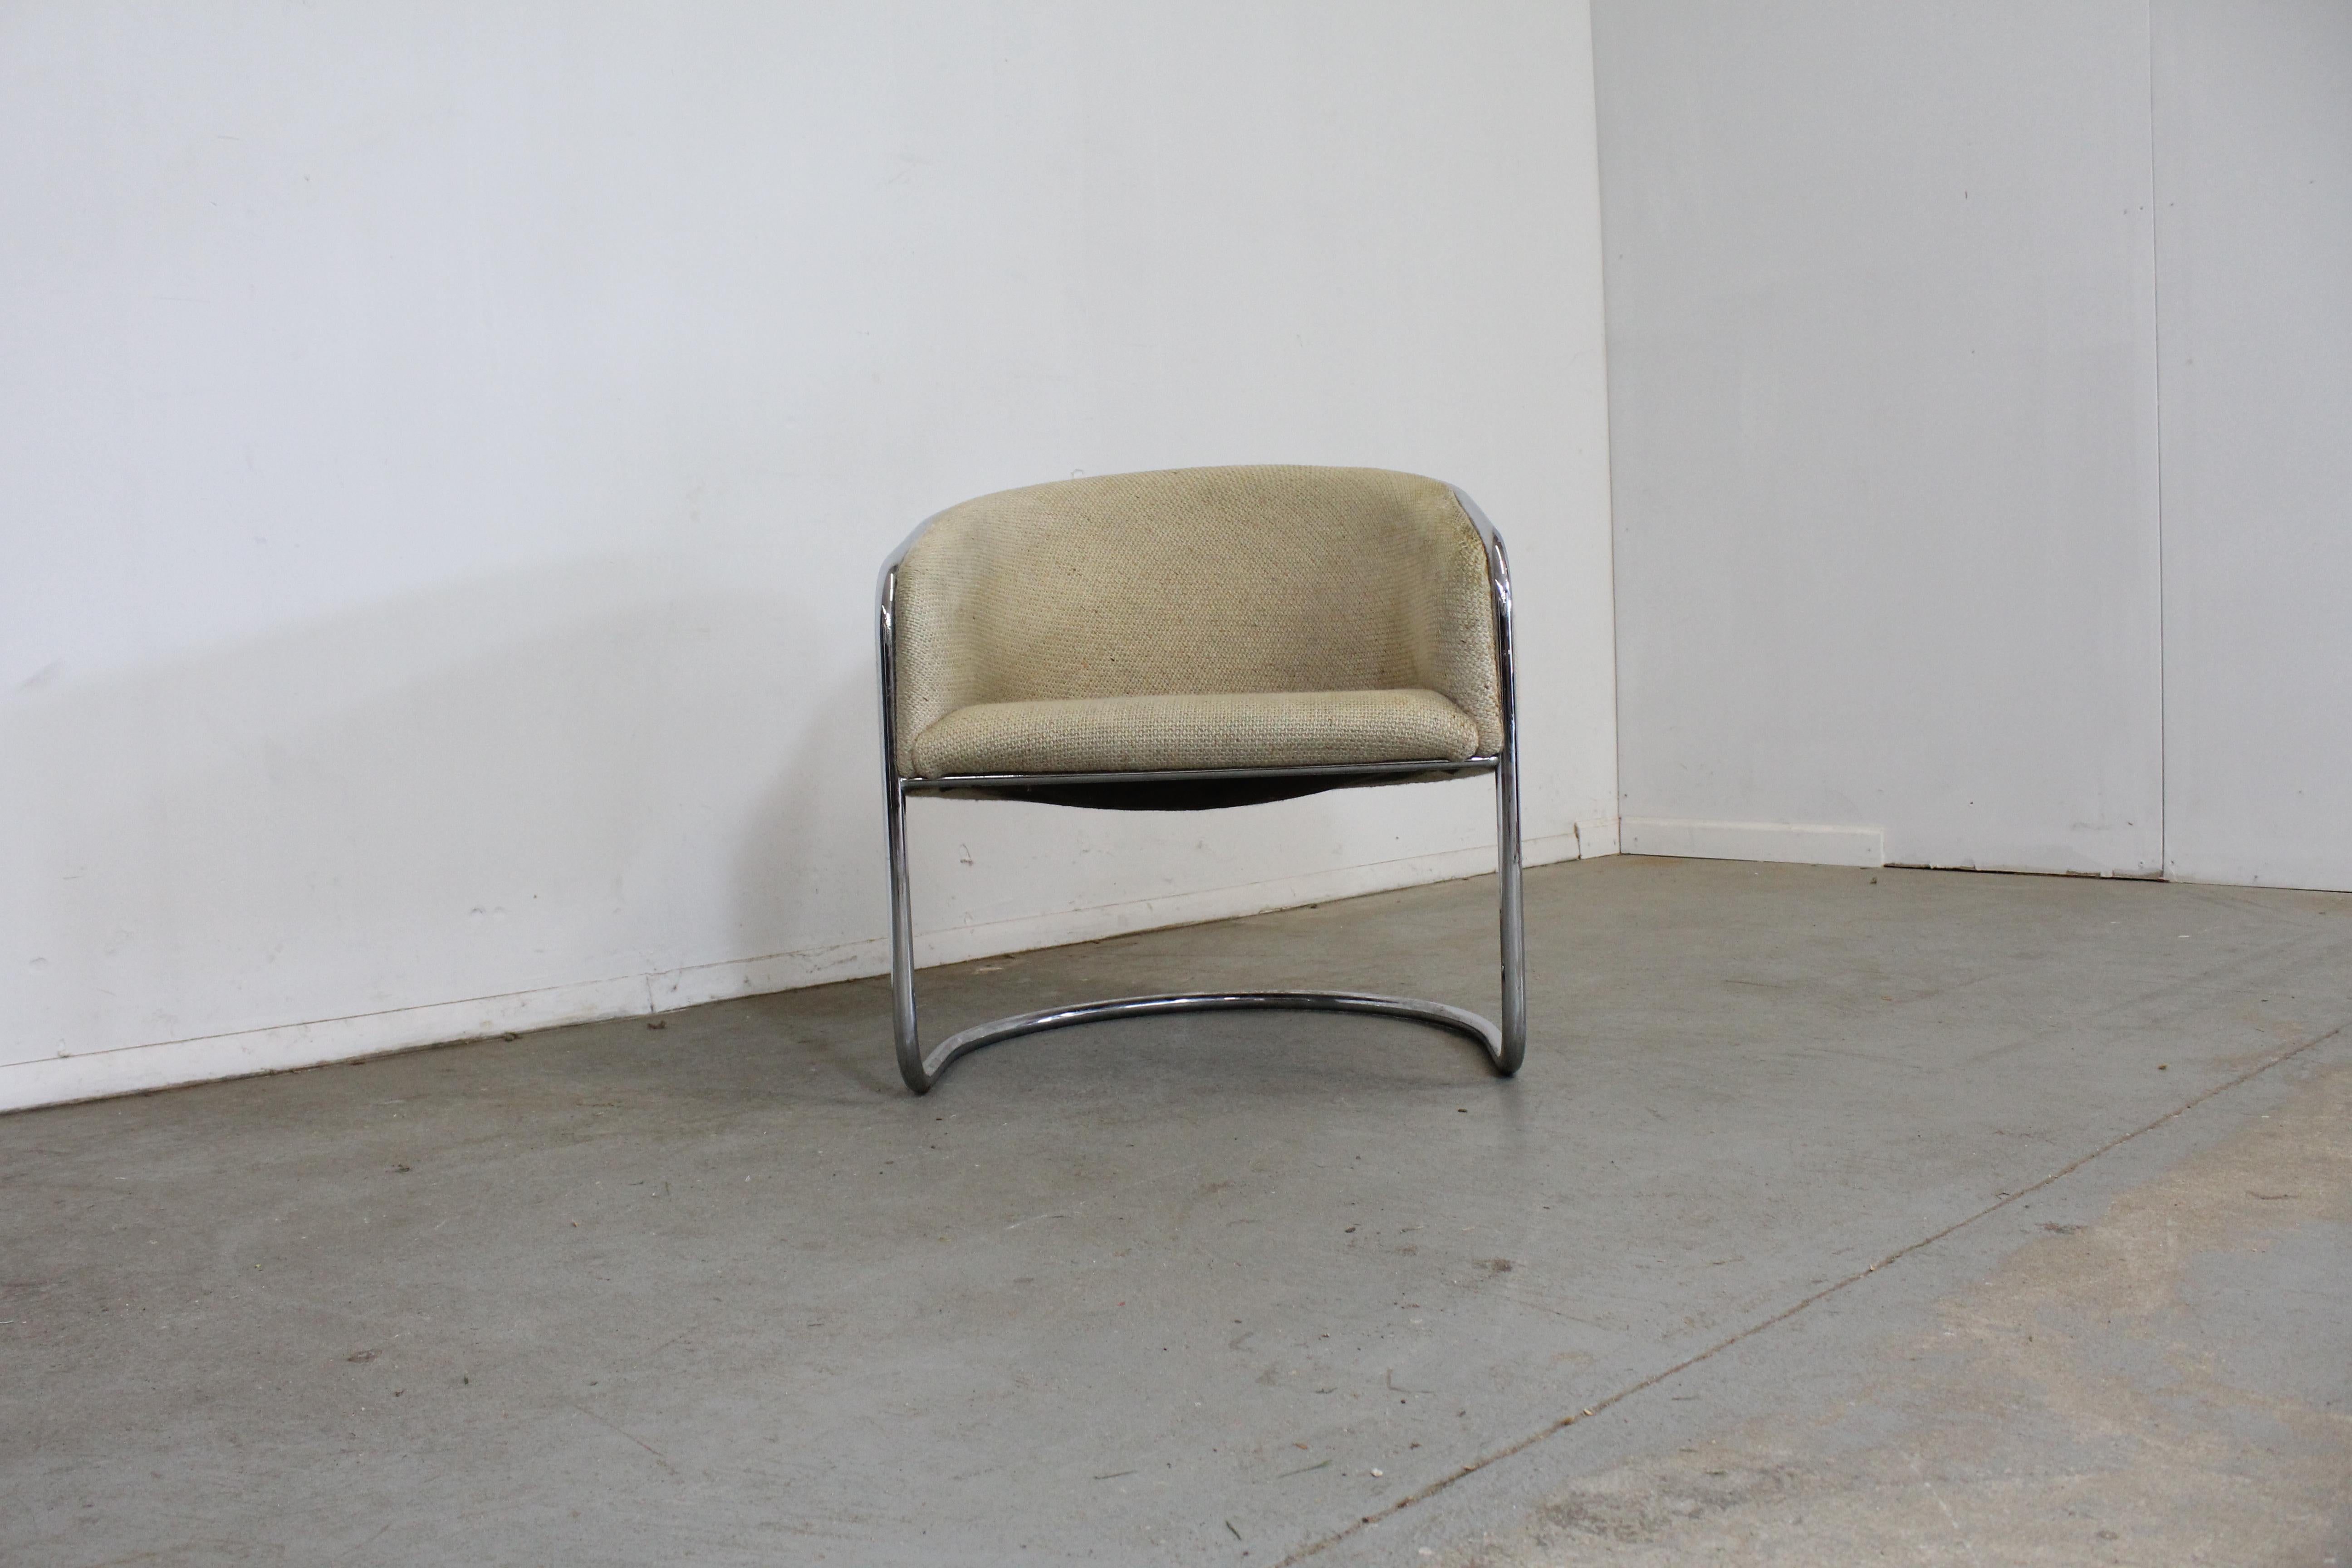 Mid-Century Modern tubular chrome accent chair

What a find. Offered is a vintage Mid-Century Modern chrome accent chair signed by Thonet Industries. It is structurally sound with staining on fabric and some patina on chrome. It should be